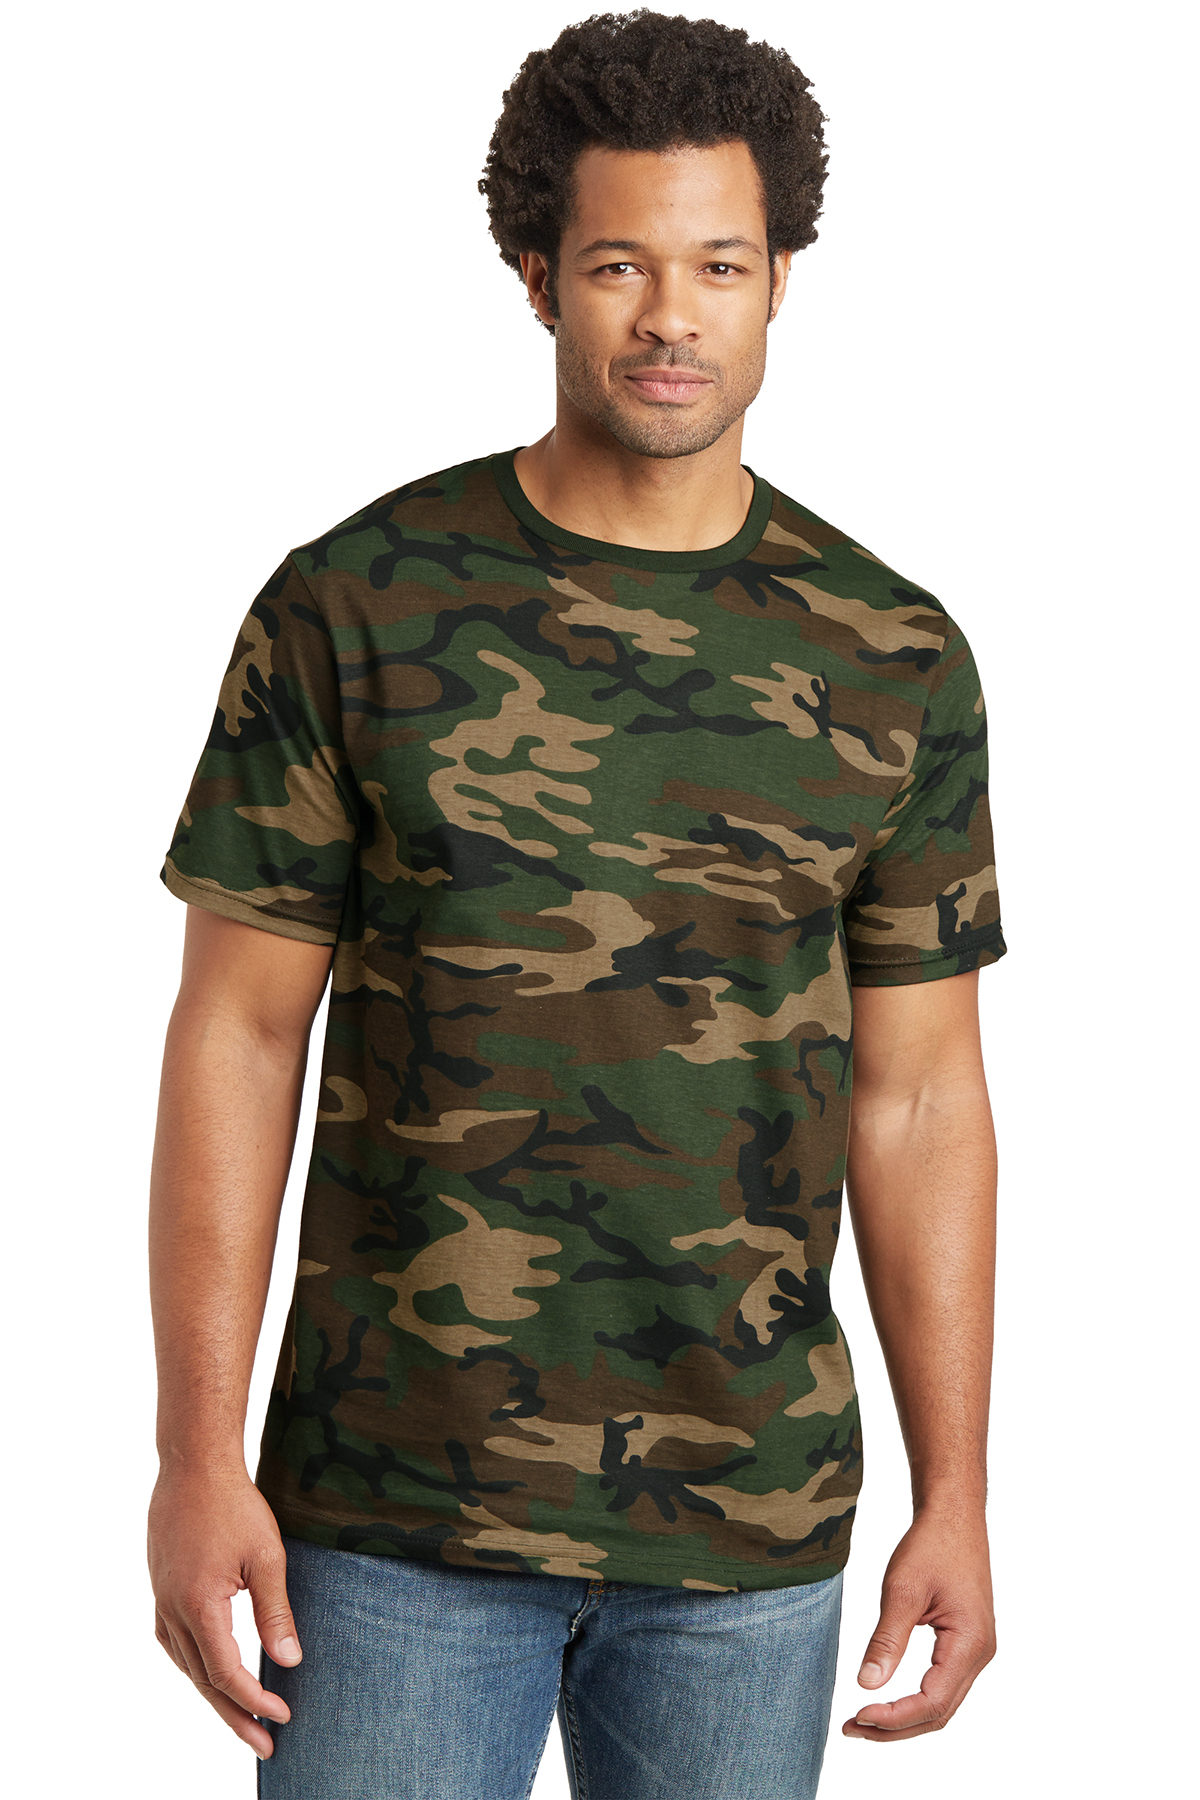 click to view Military Camo